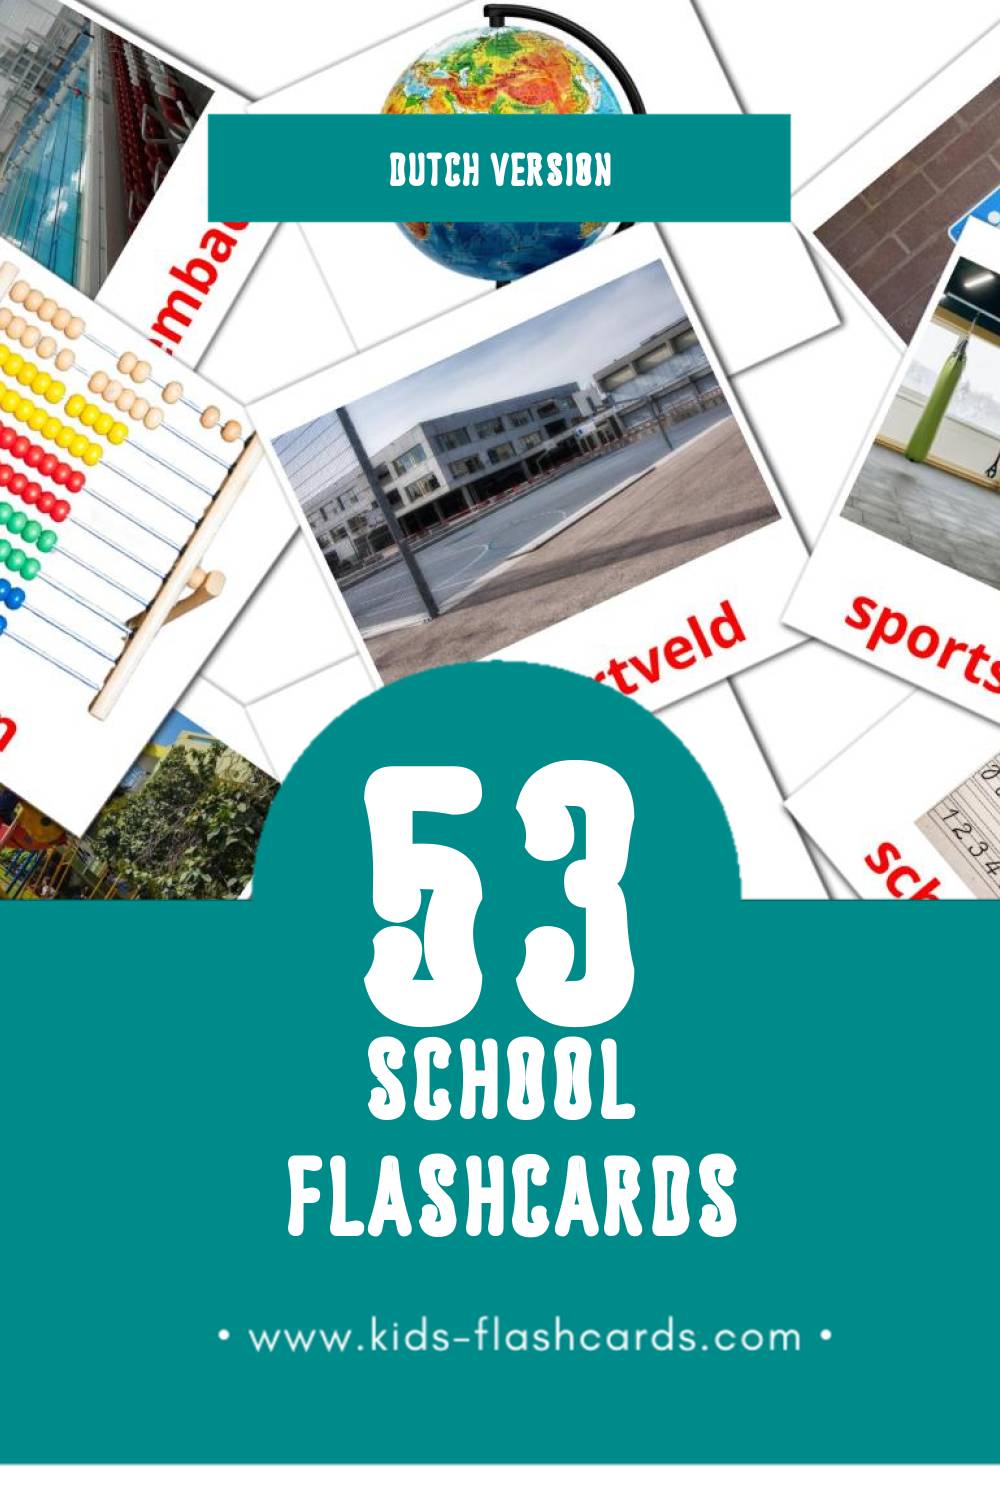 Visual School Flashcards for Toddlers (53 cards in Dutch)